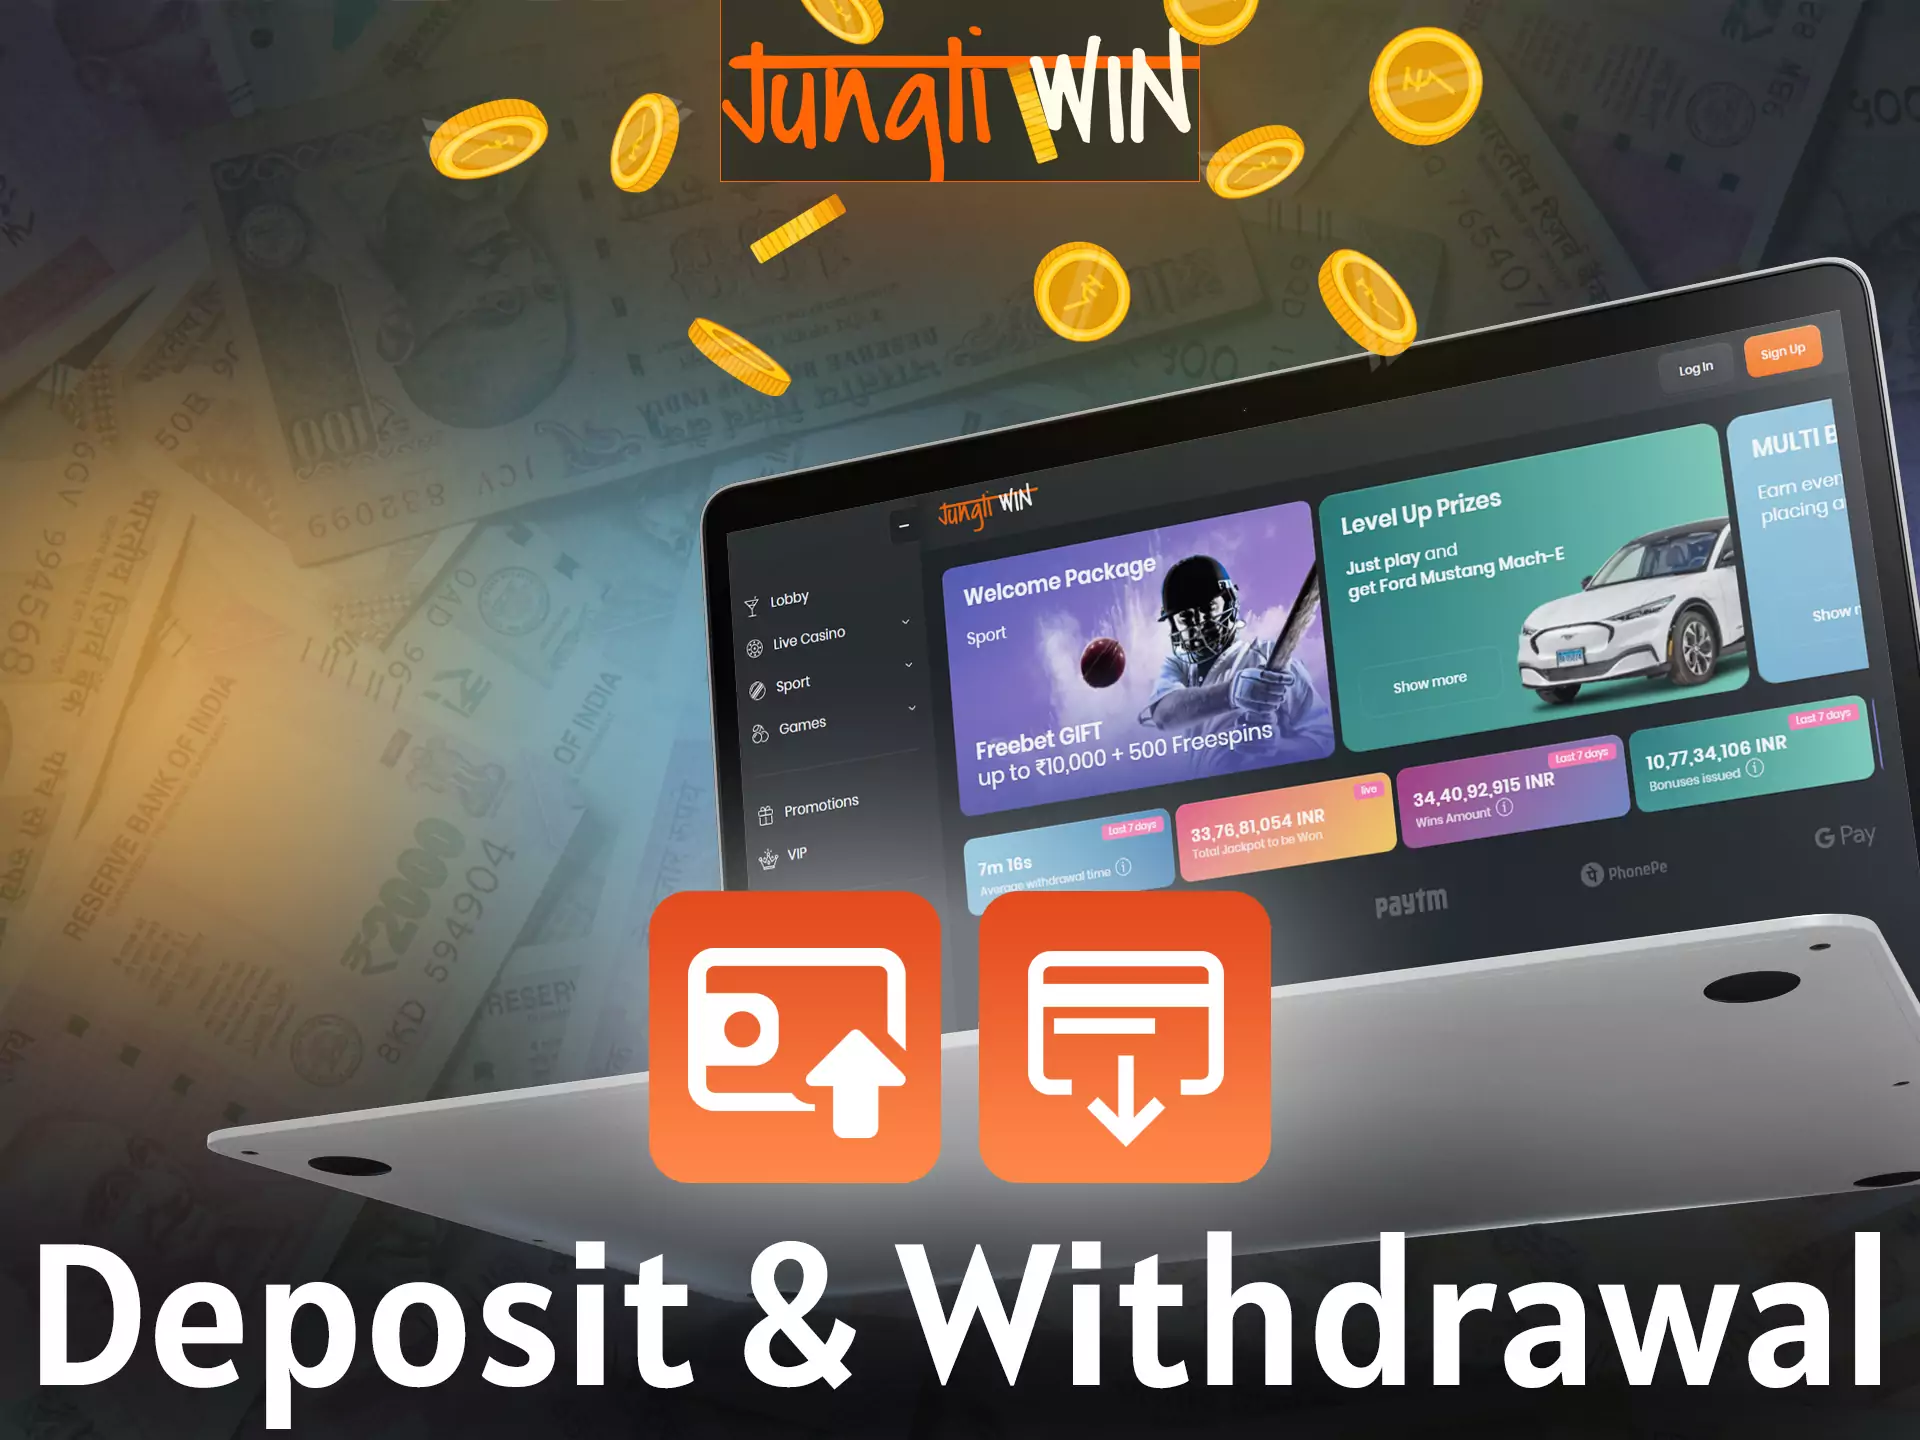 With this instruction, learn how to withdraw and deposit your account on Jungliwin.